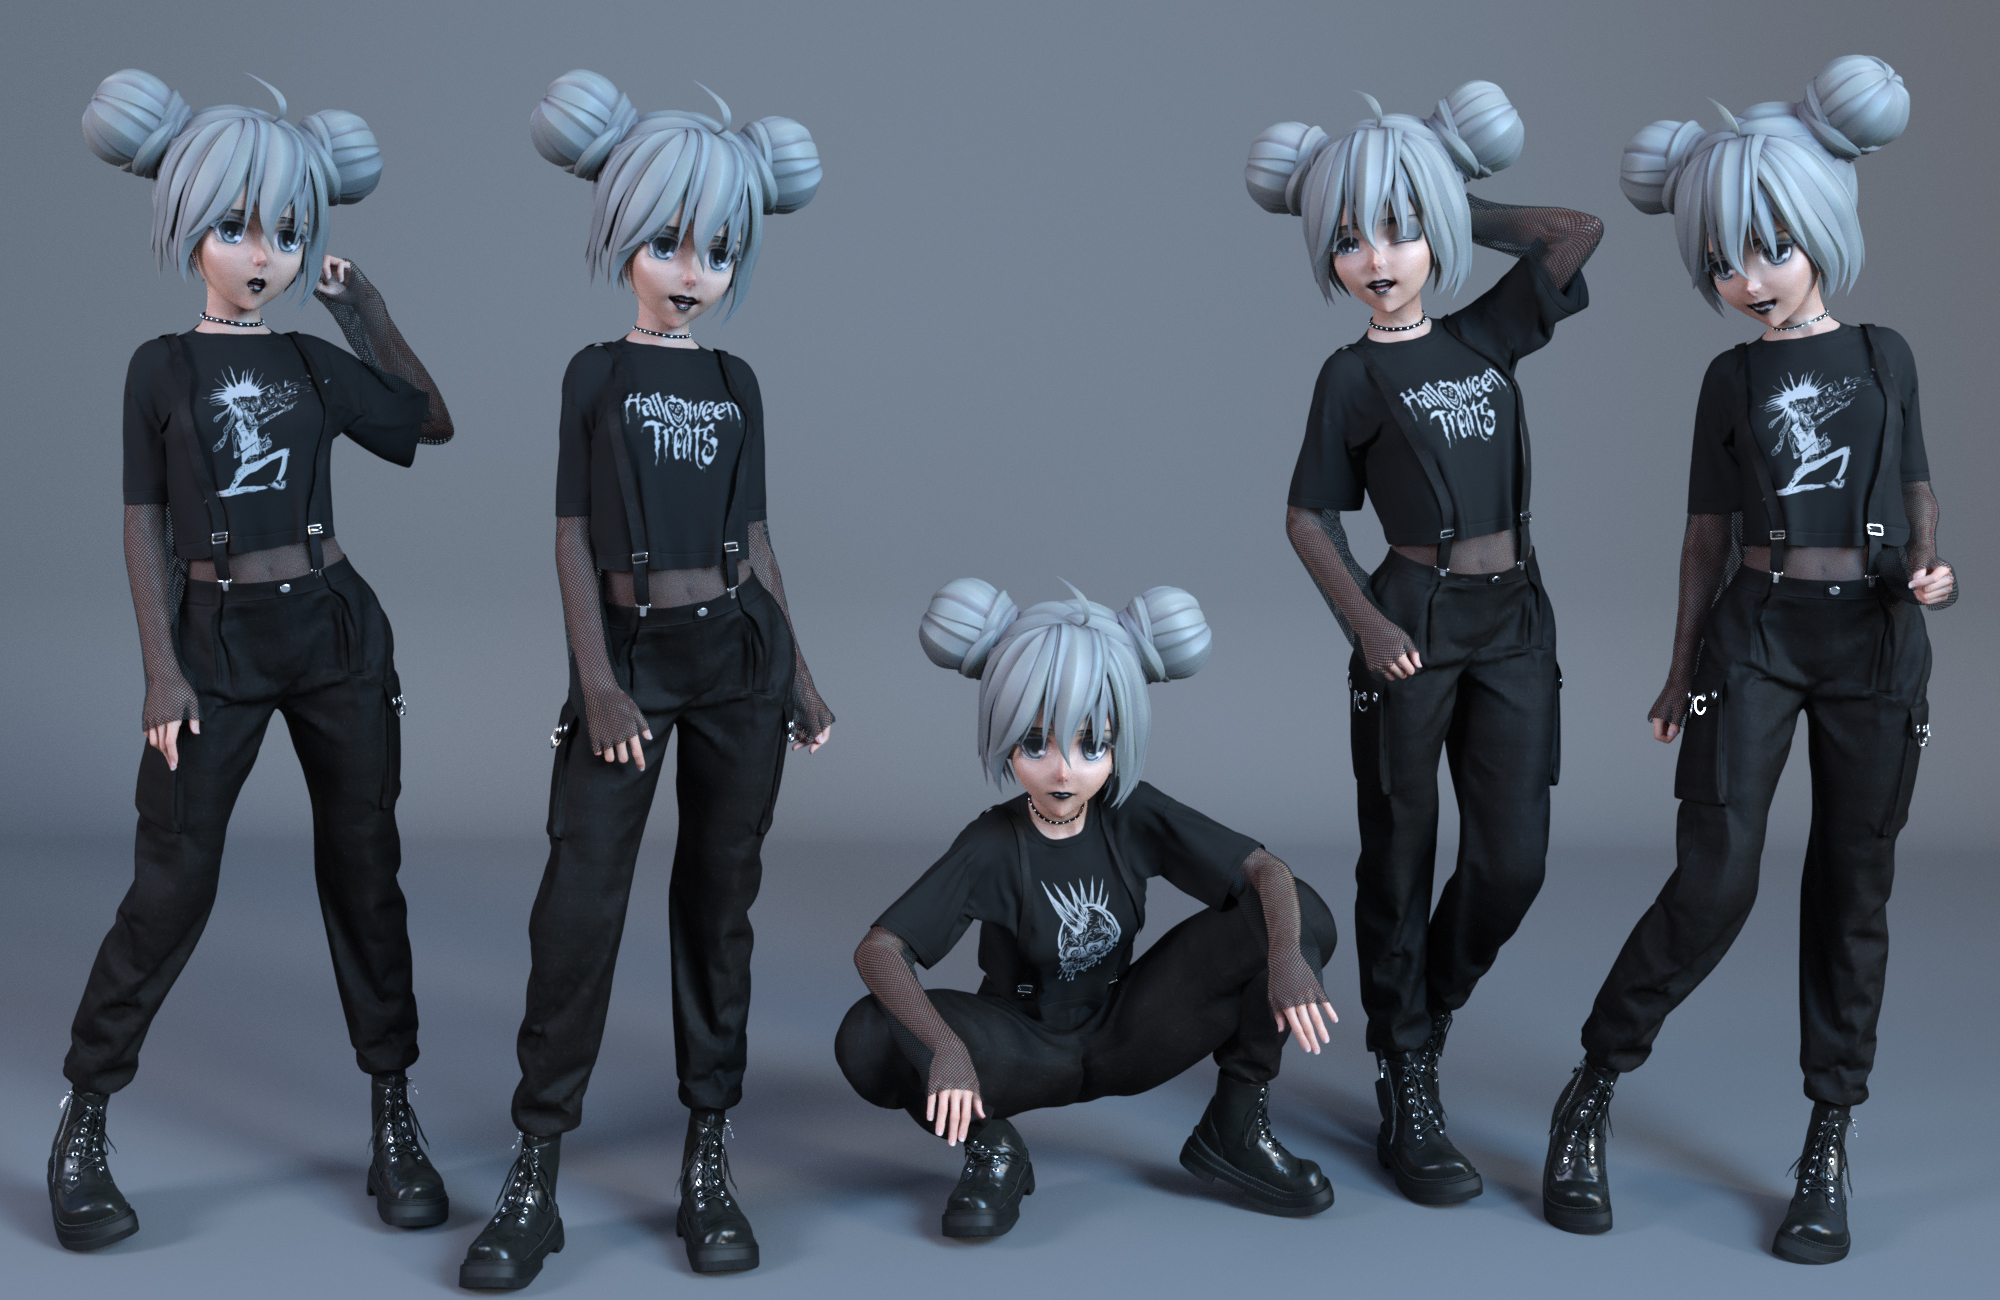 FE dForce Punk Street Outfit and Poses for Genesis 8 Females by: FeSoul, 3D Models by Daz 3D